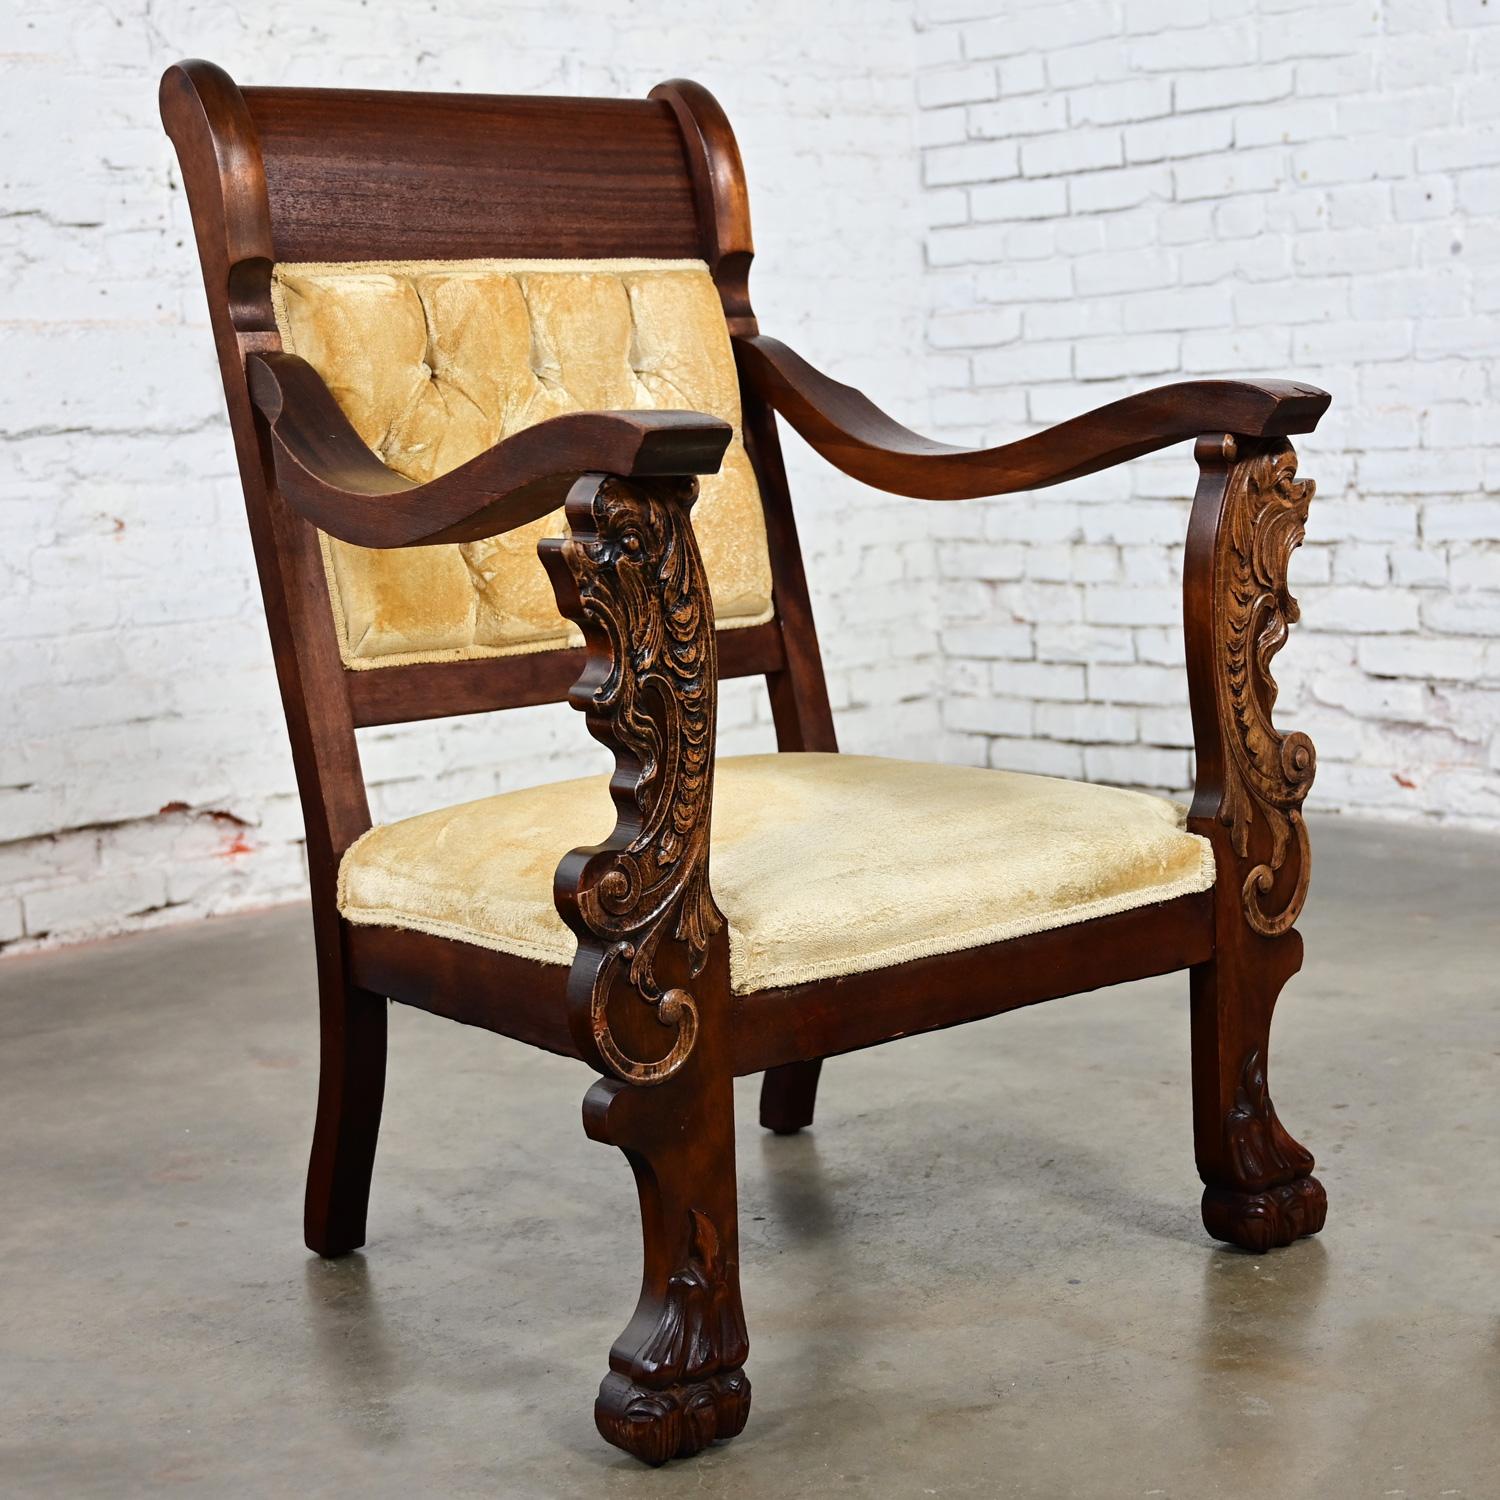 1800's chair styles